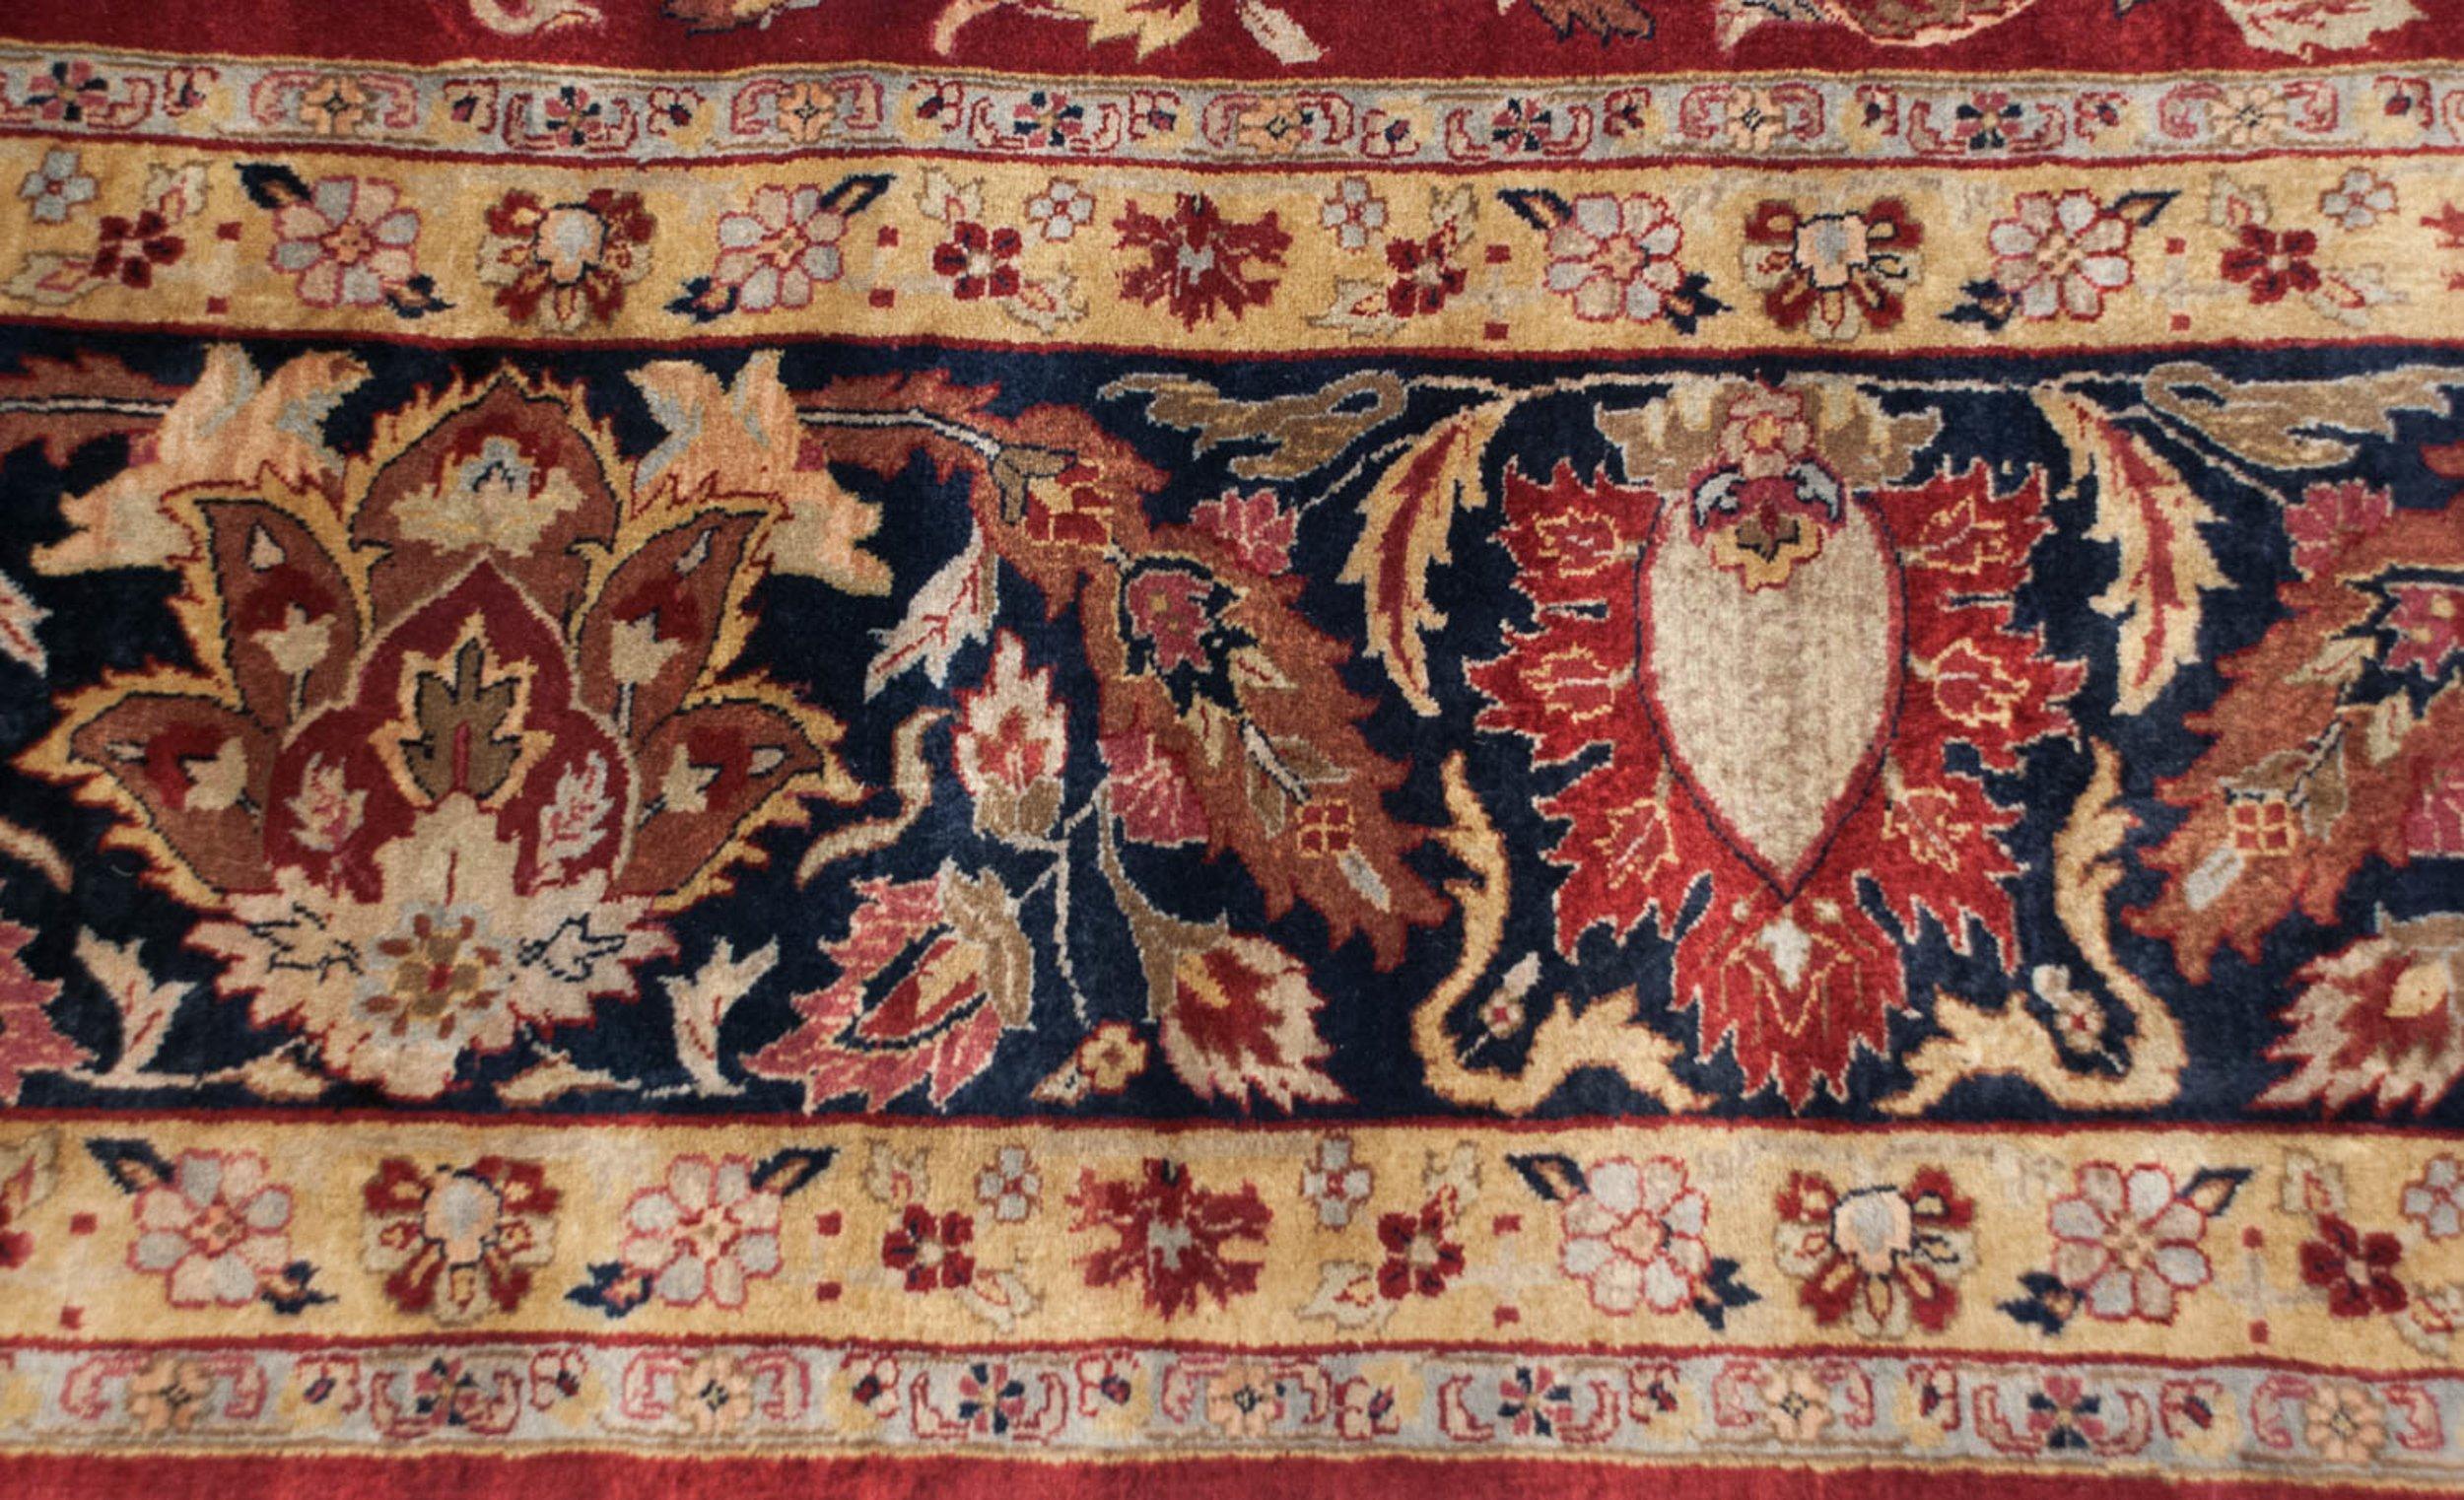 Allover covered field in a classic late 19th century design bearing scrolling tendrils, floral cross sections, bounty of detailed buds and blossoms and awesome deep saturated rich colors across. Weaver insignia top and center of the main border.